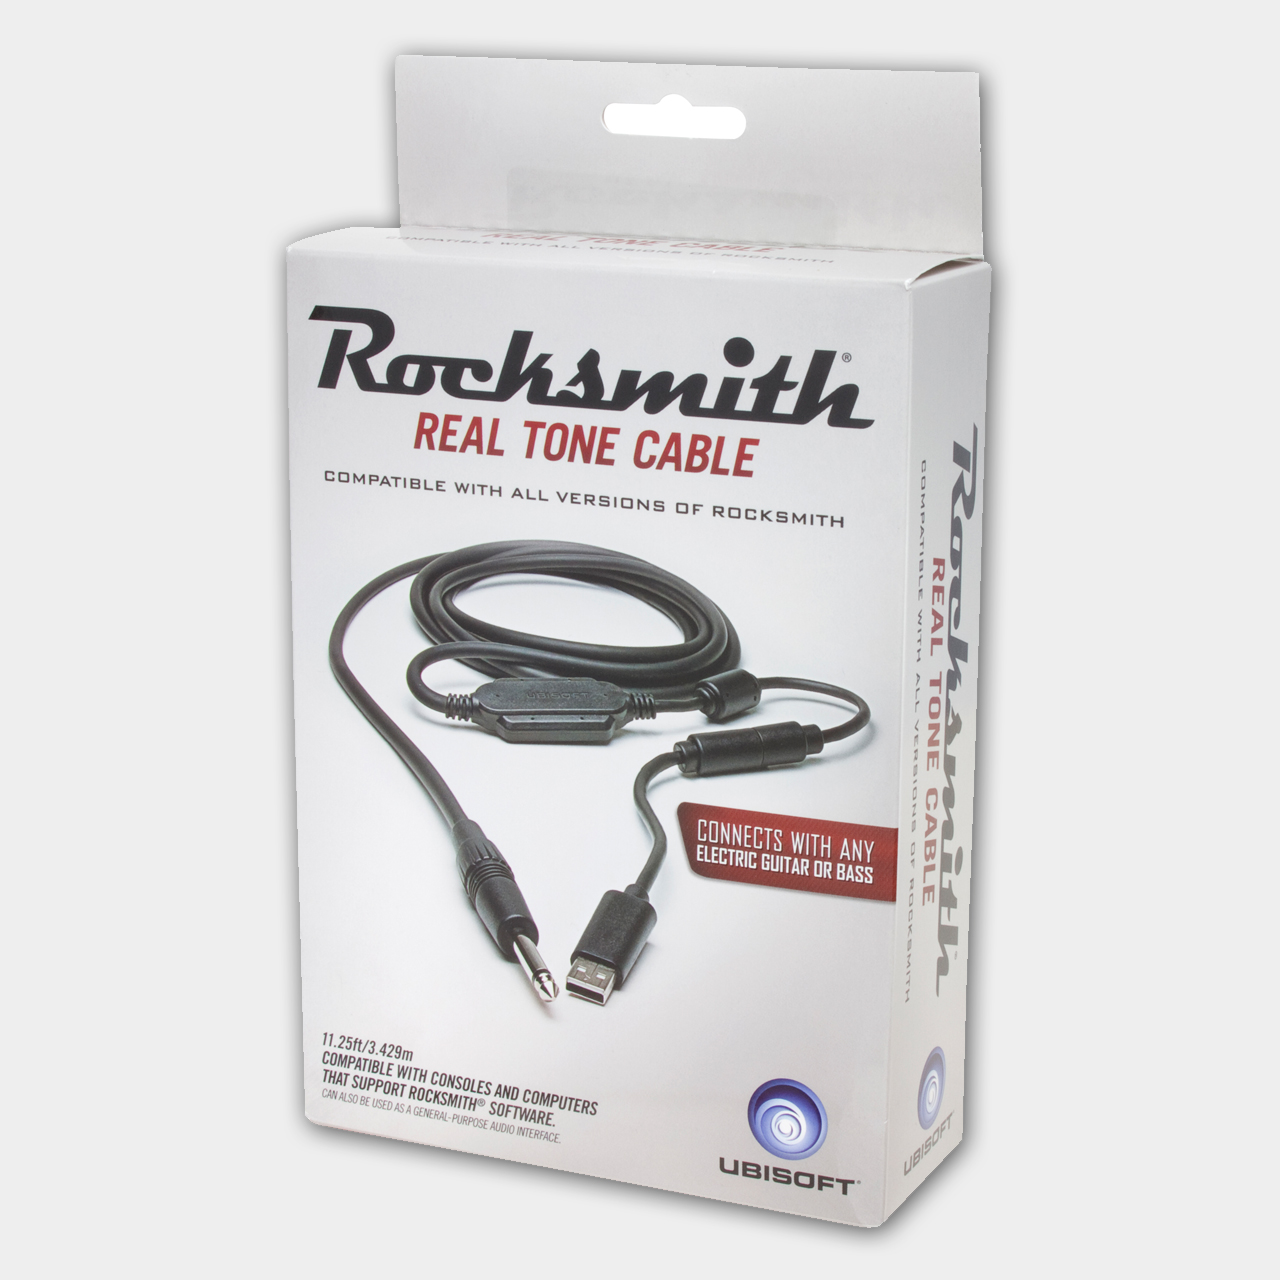 rocksmith real tone cable configuration